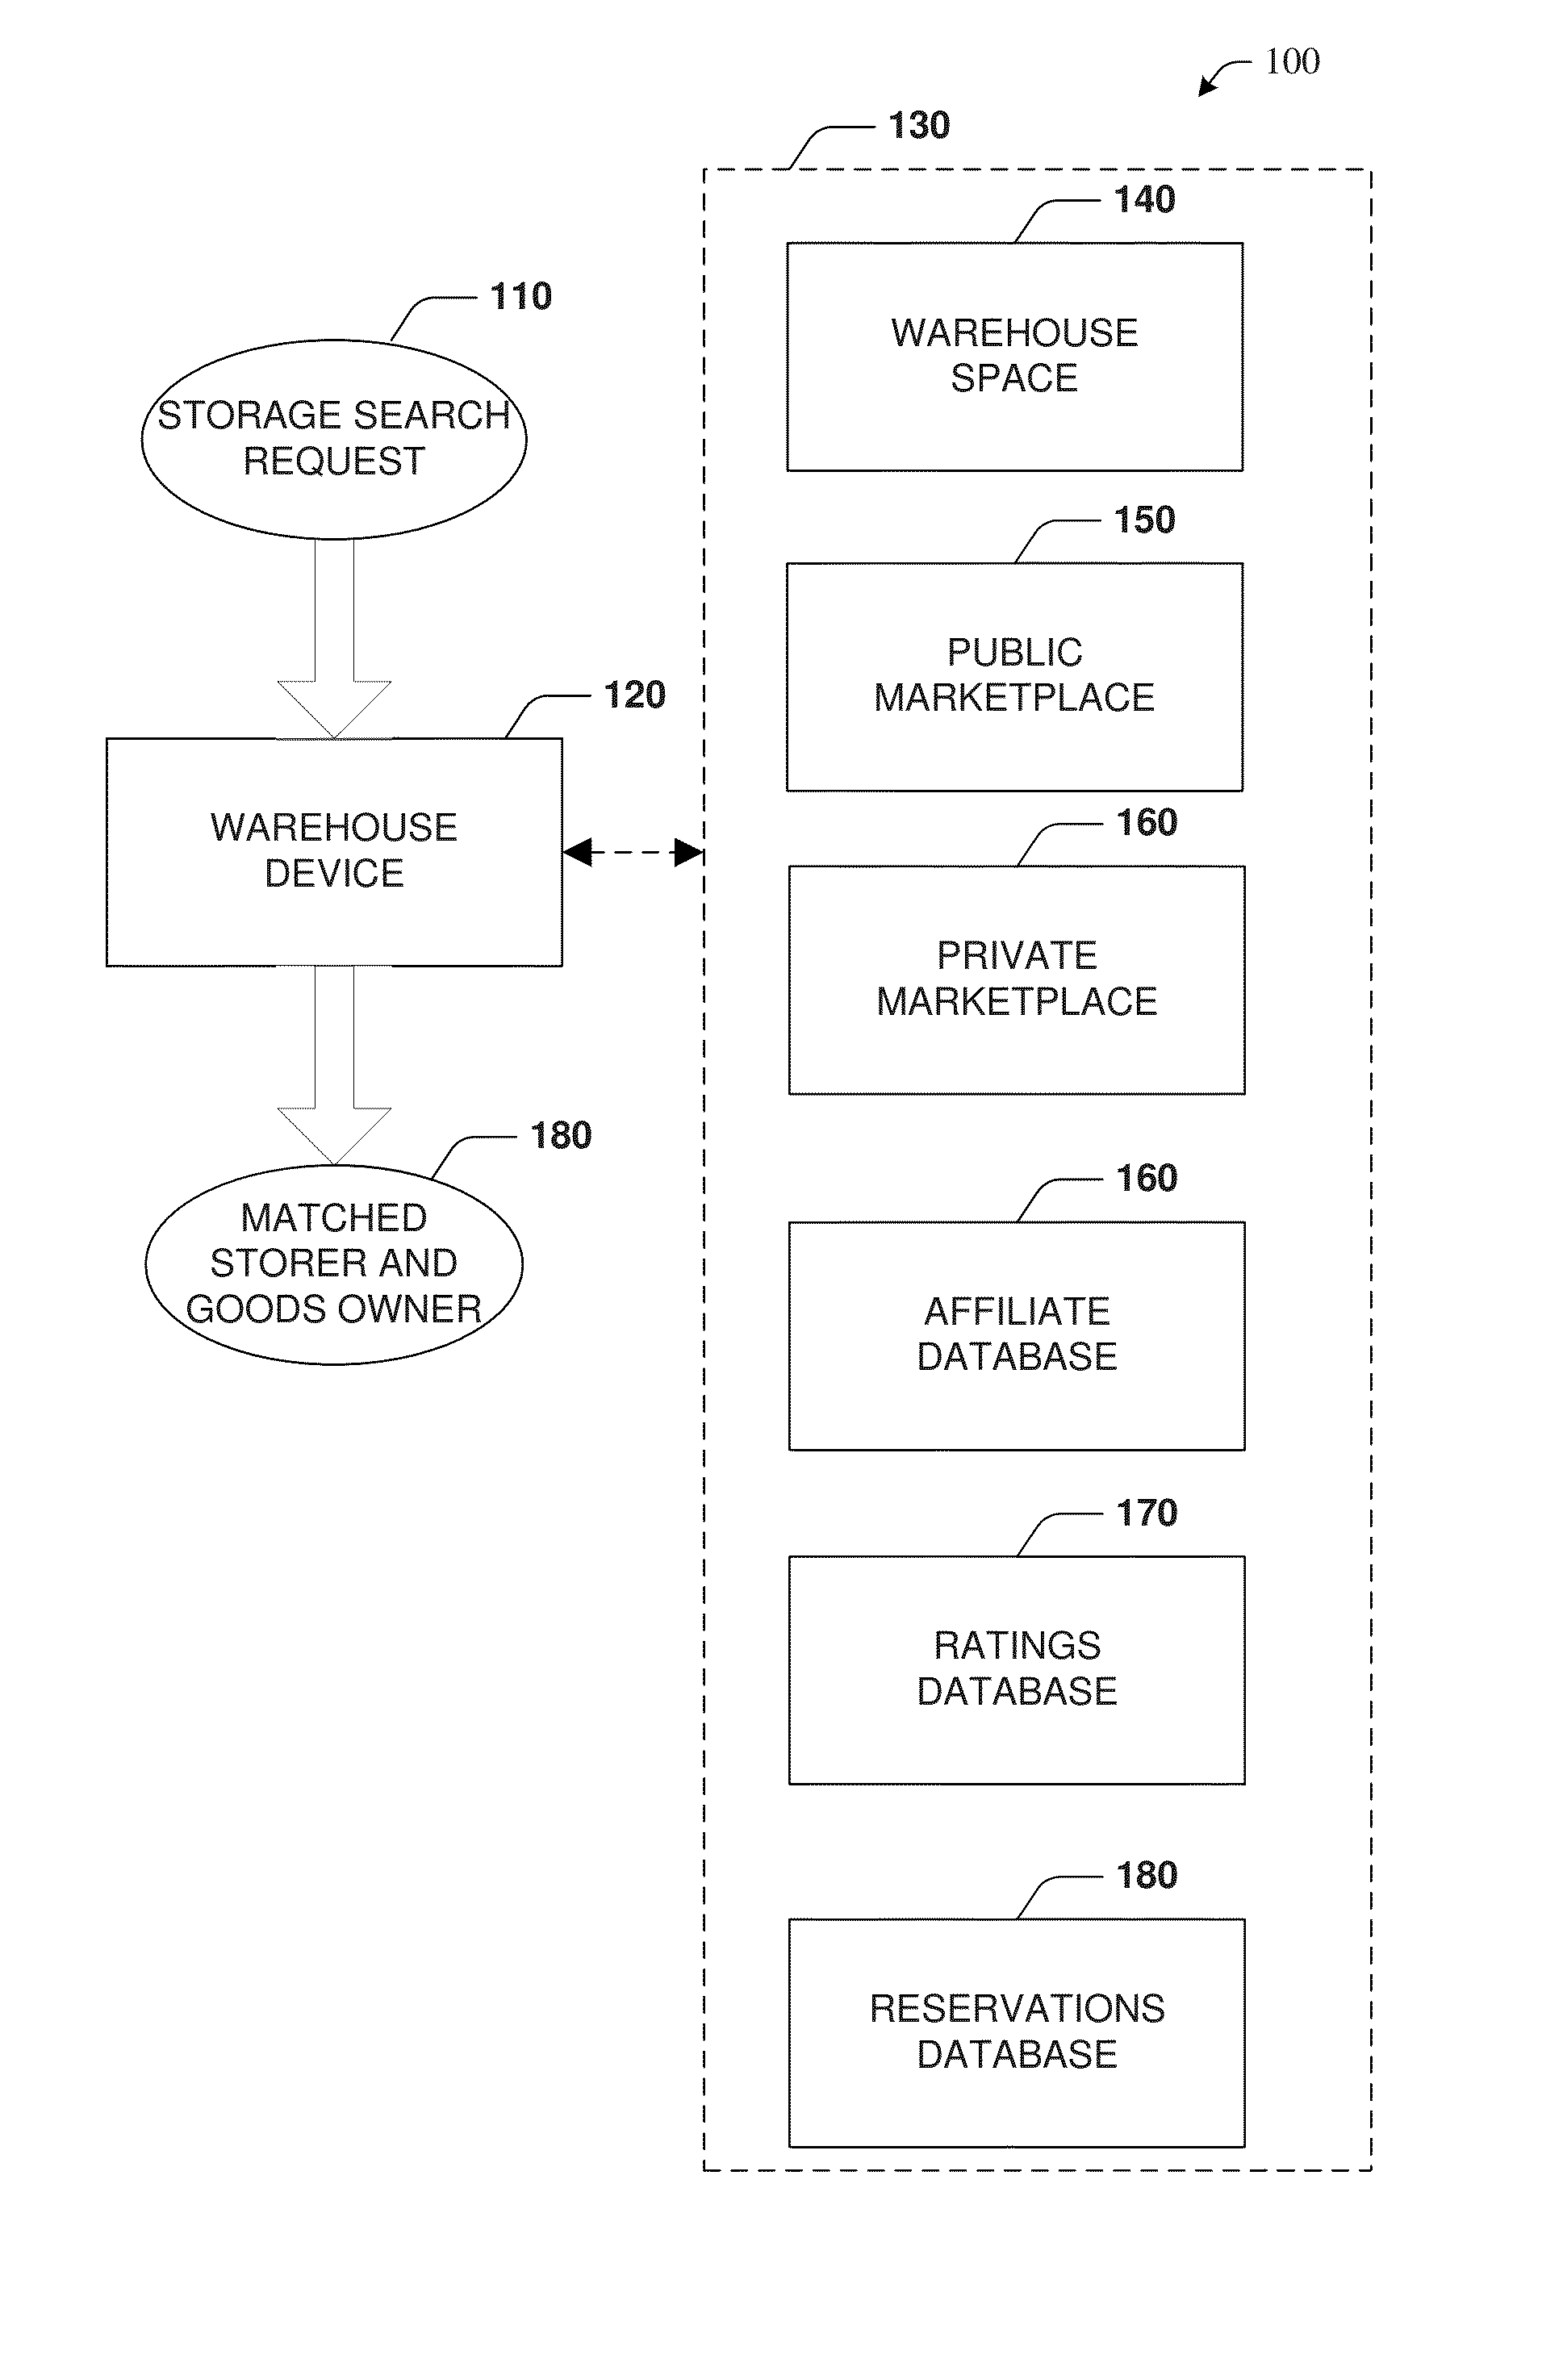 System and method for an internet-enabled marketplace for commercial warehouse storage and services